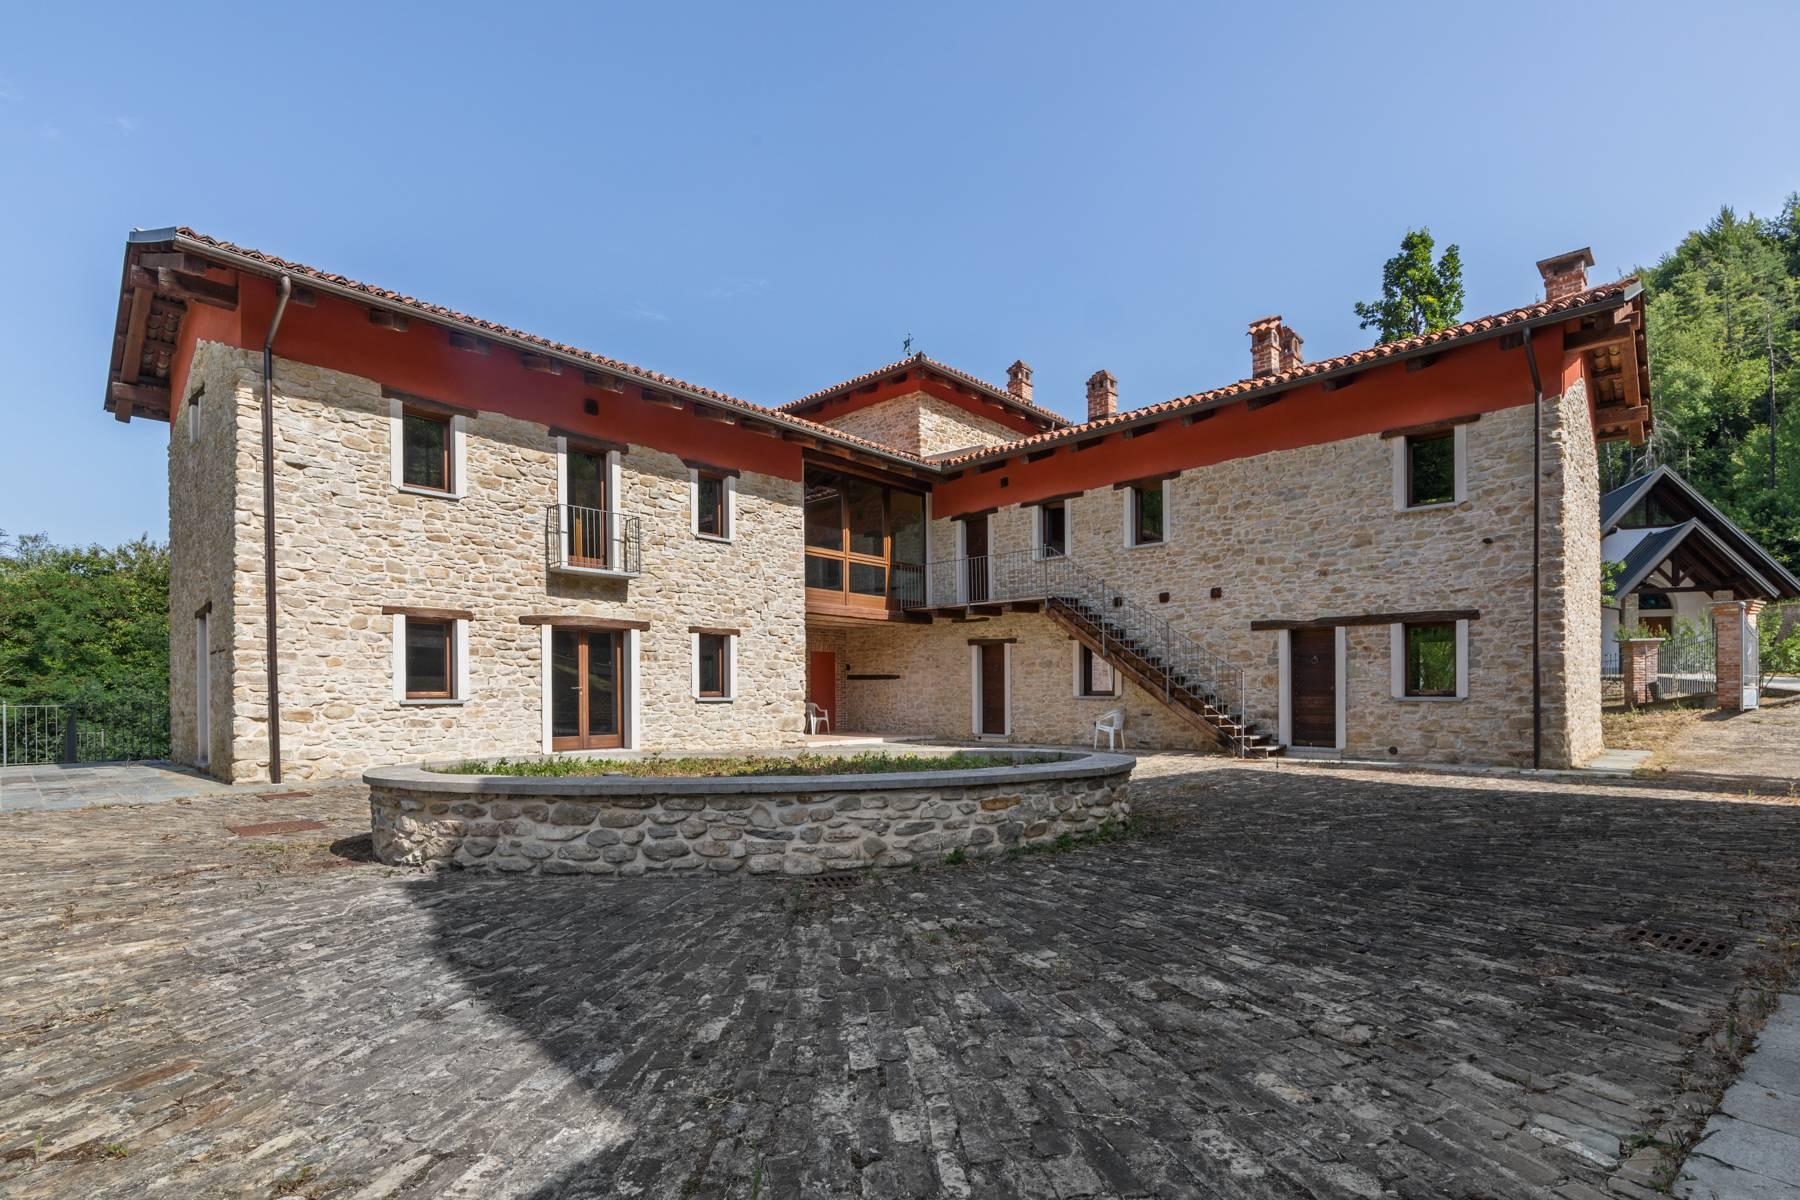 Lovely small private village in the Langhe region - 1